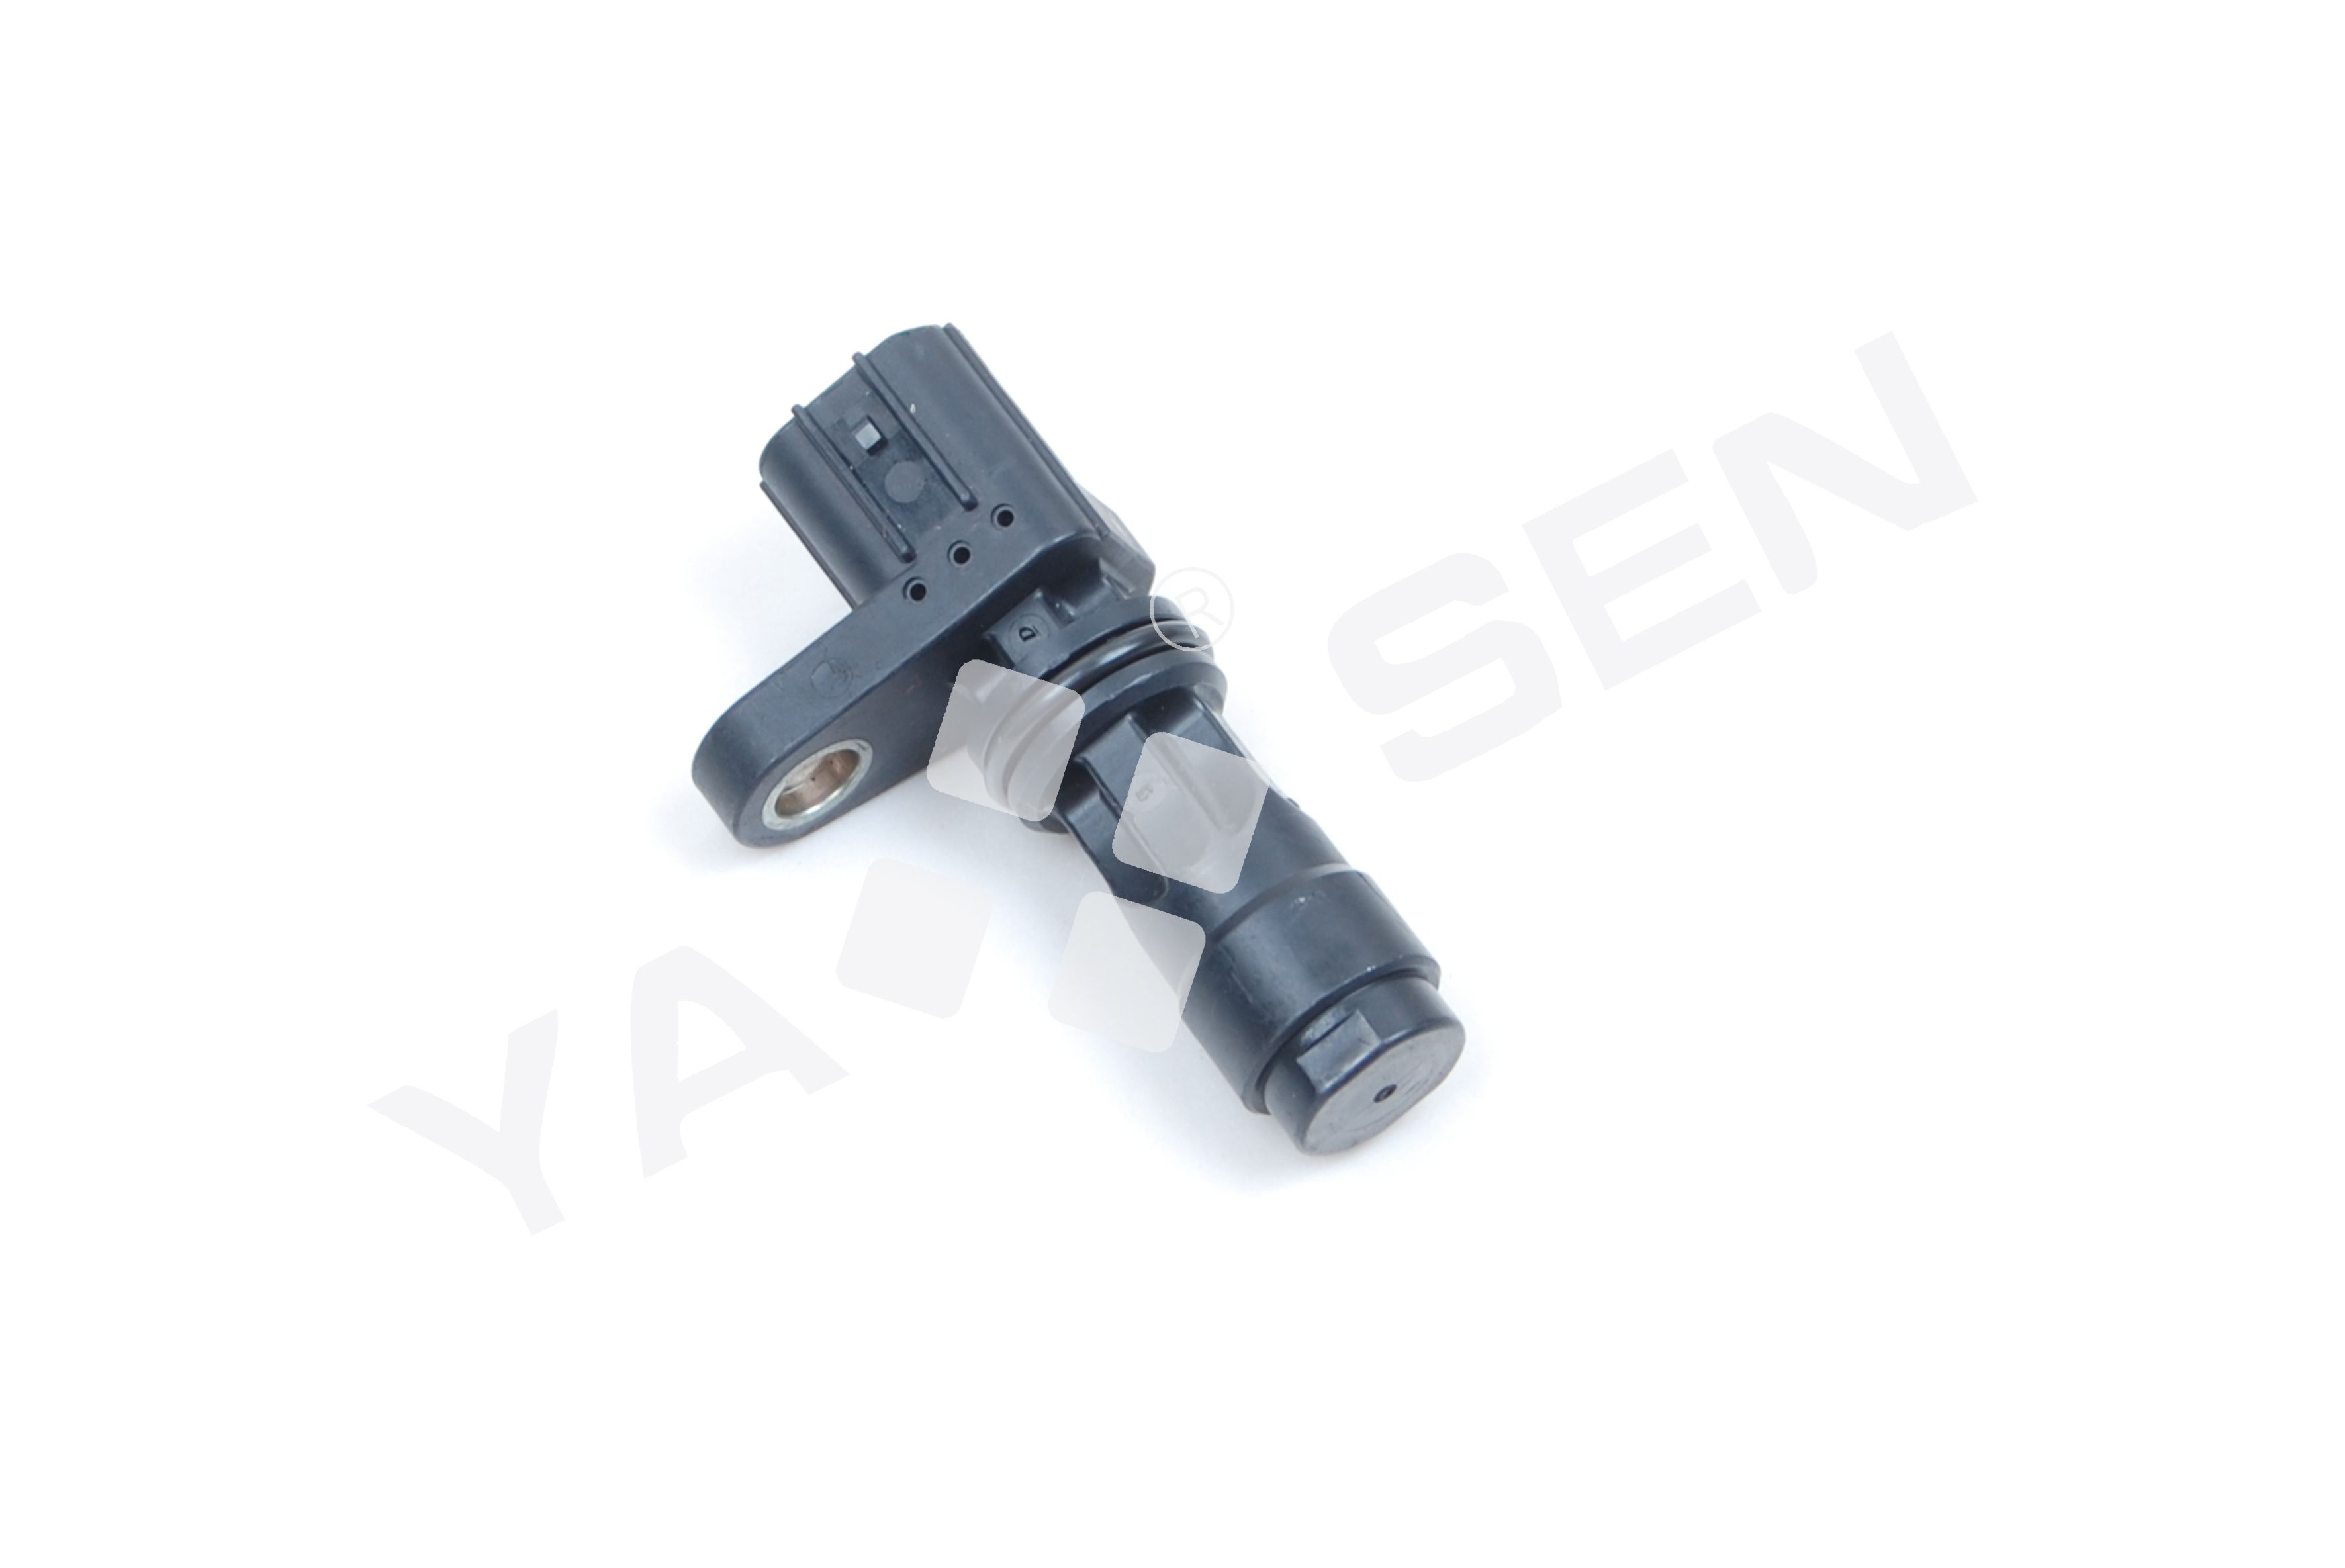 Professional Design Scania Camshaft Position Sensor - Crankshaft Position Sensor for Honda, 37500-PNB-003 37500-PNA-003 PC376  5S1917 180-0392  147-7082  CSS9134  SU6146 – YASEN